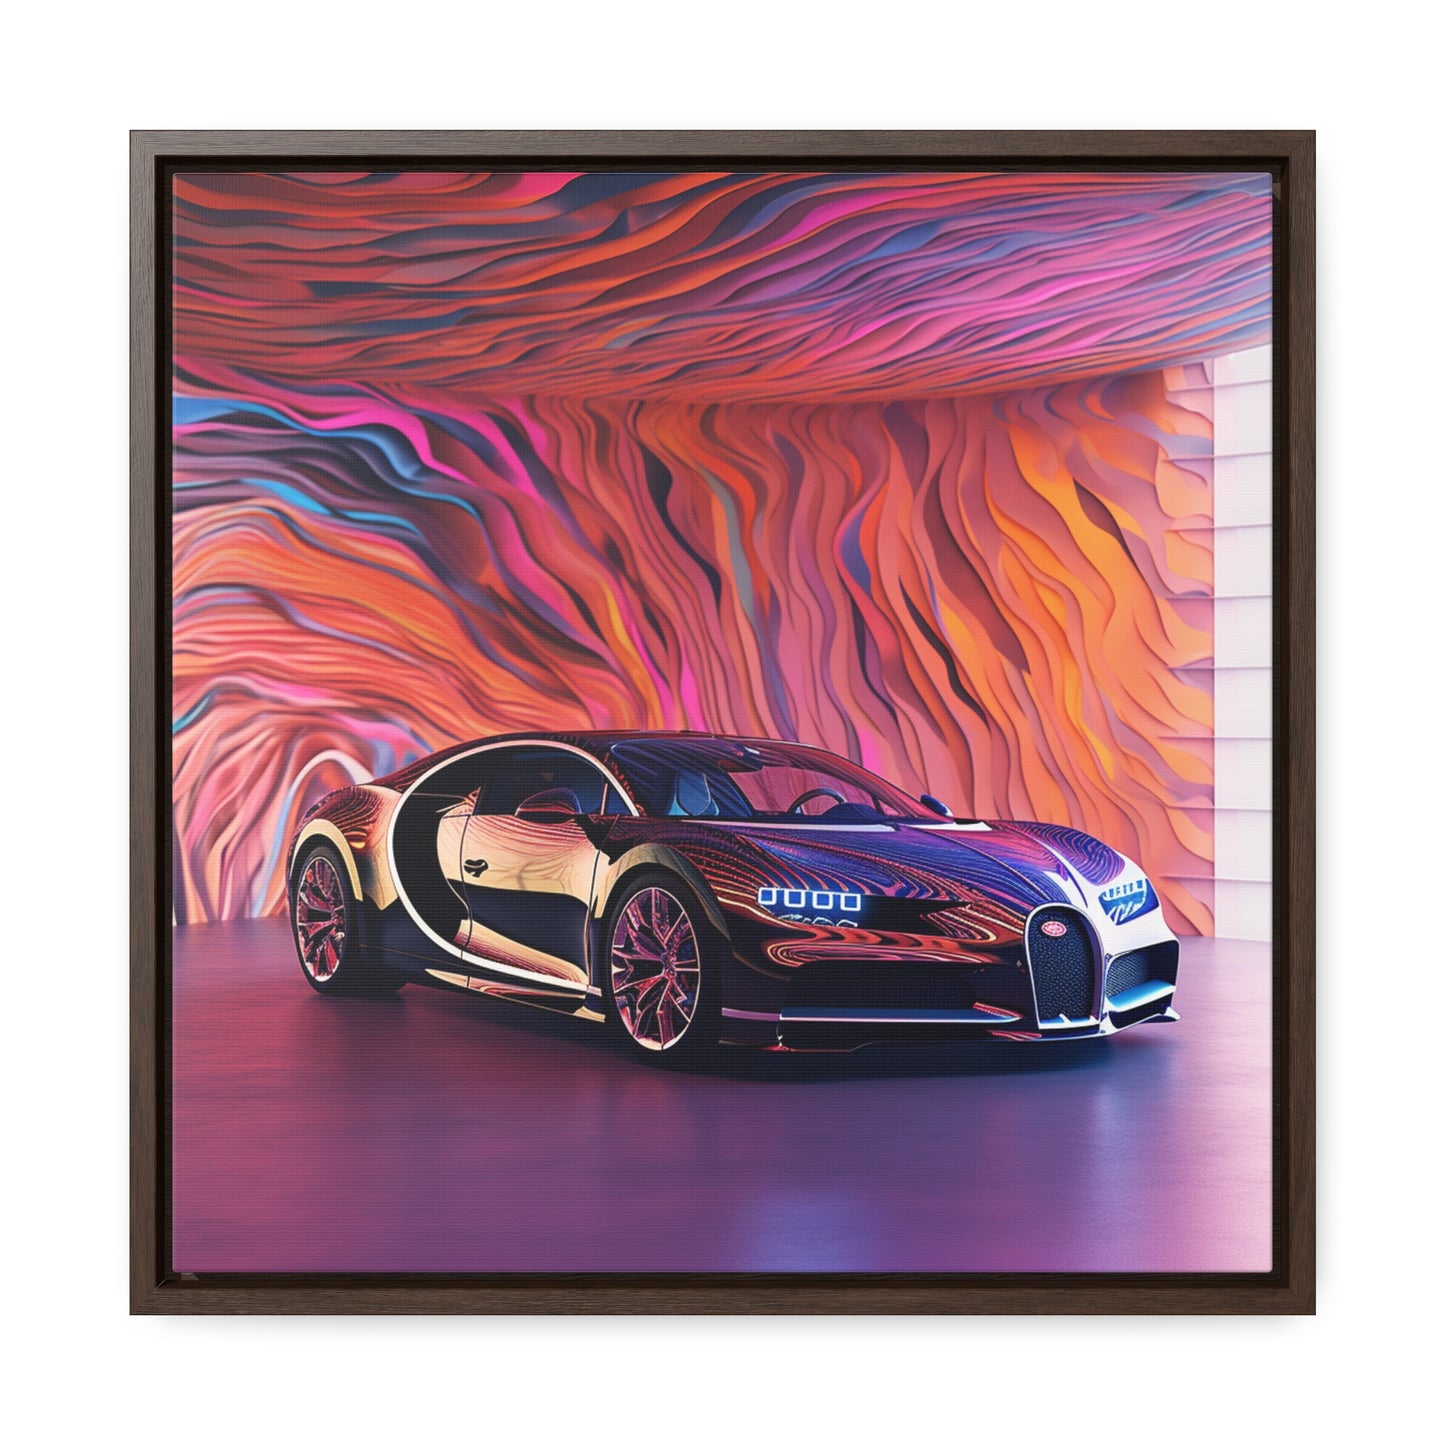 Gallery Canvas Wraps, Square Frame Bugatti Abstract Flair 4